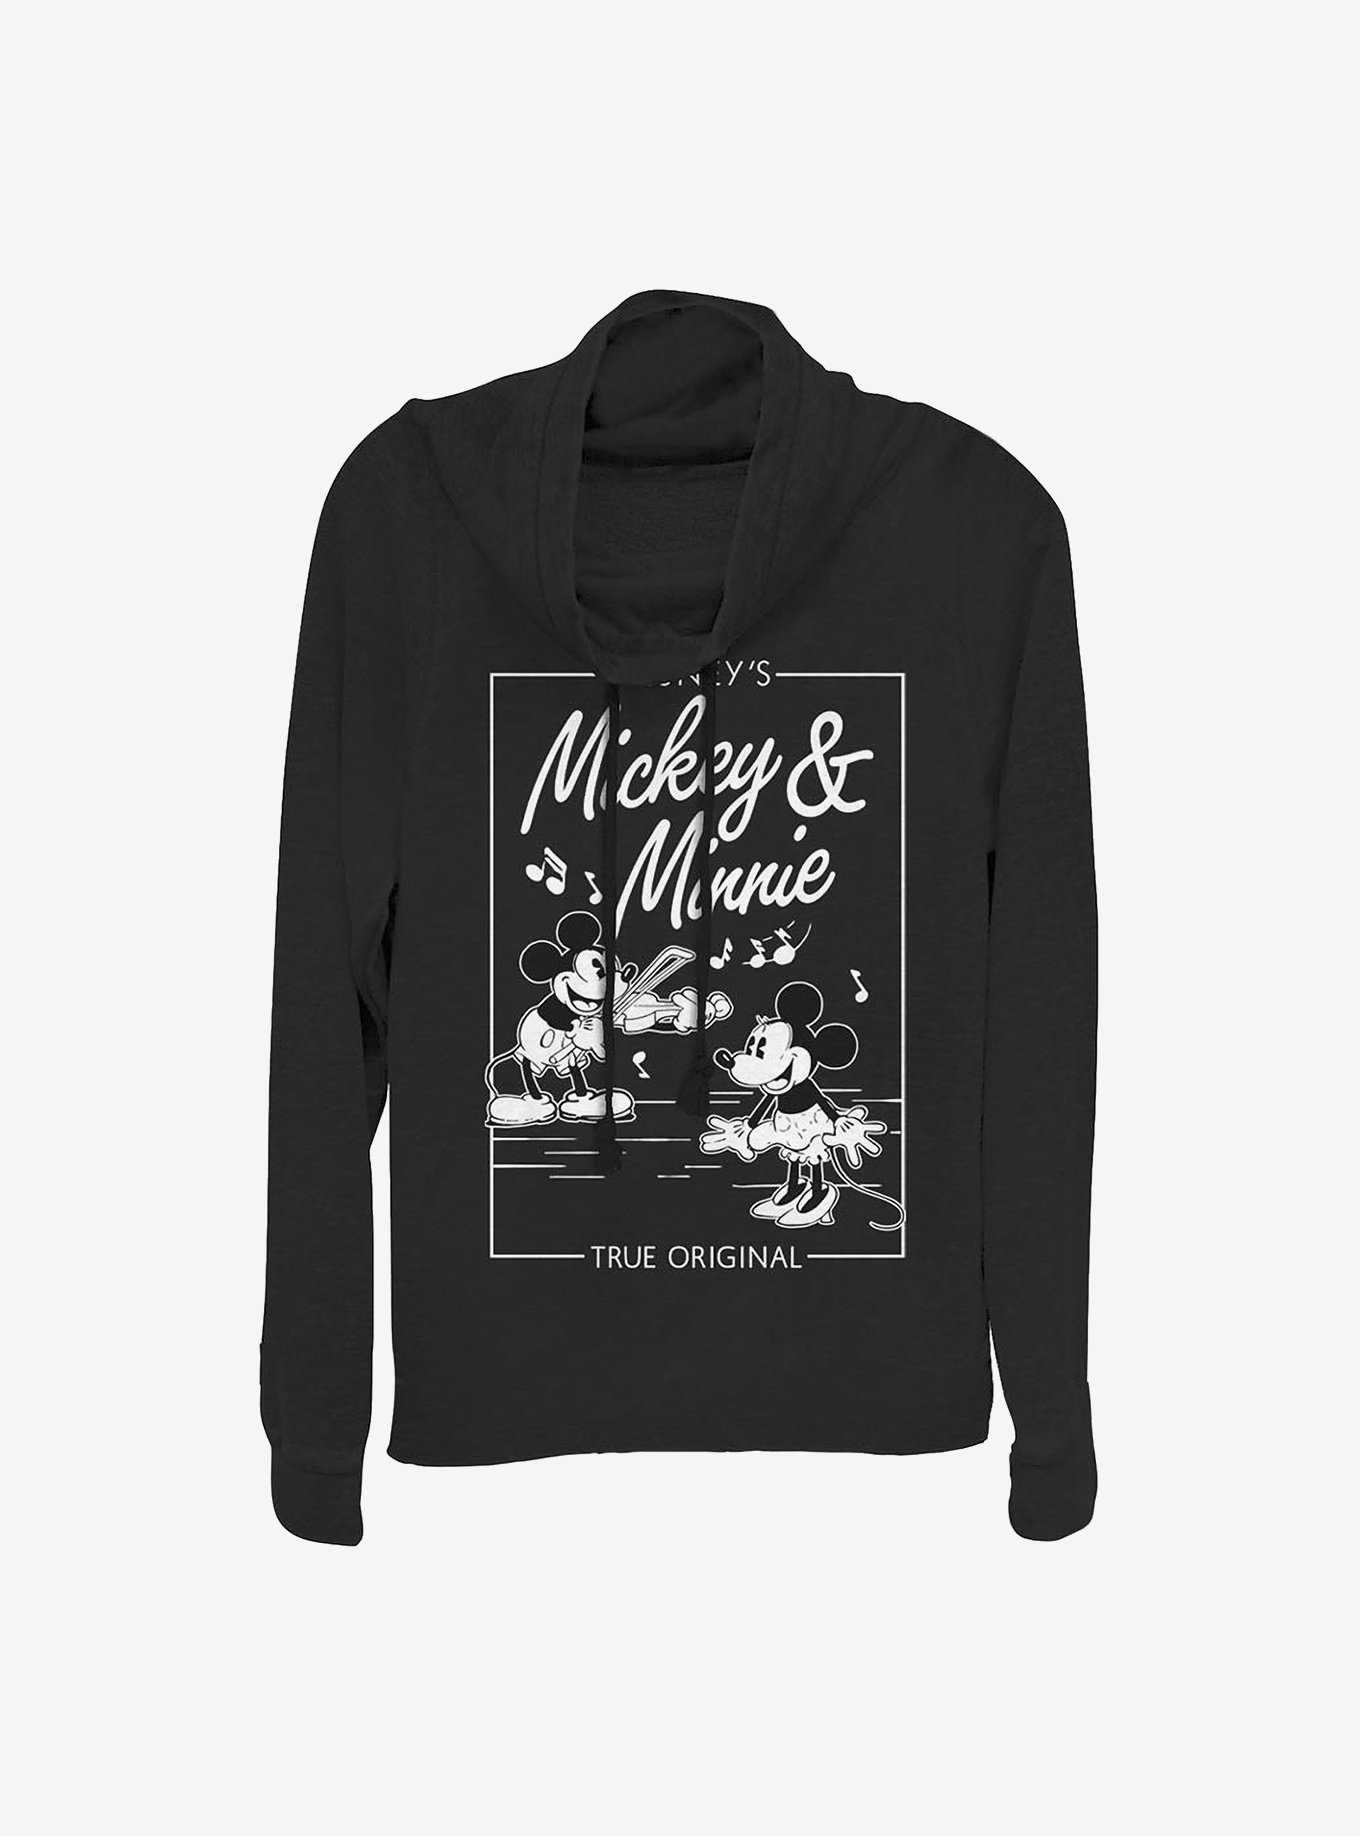 Disney Mickey Mouse & Minnie Mouse Music Cover Cowlneck Long-Sleeve Girls Top, , hi-res